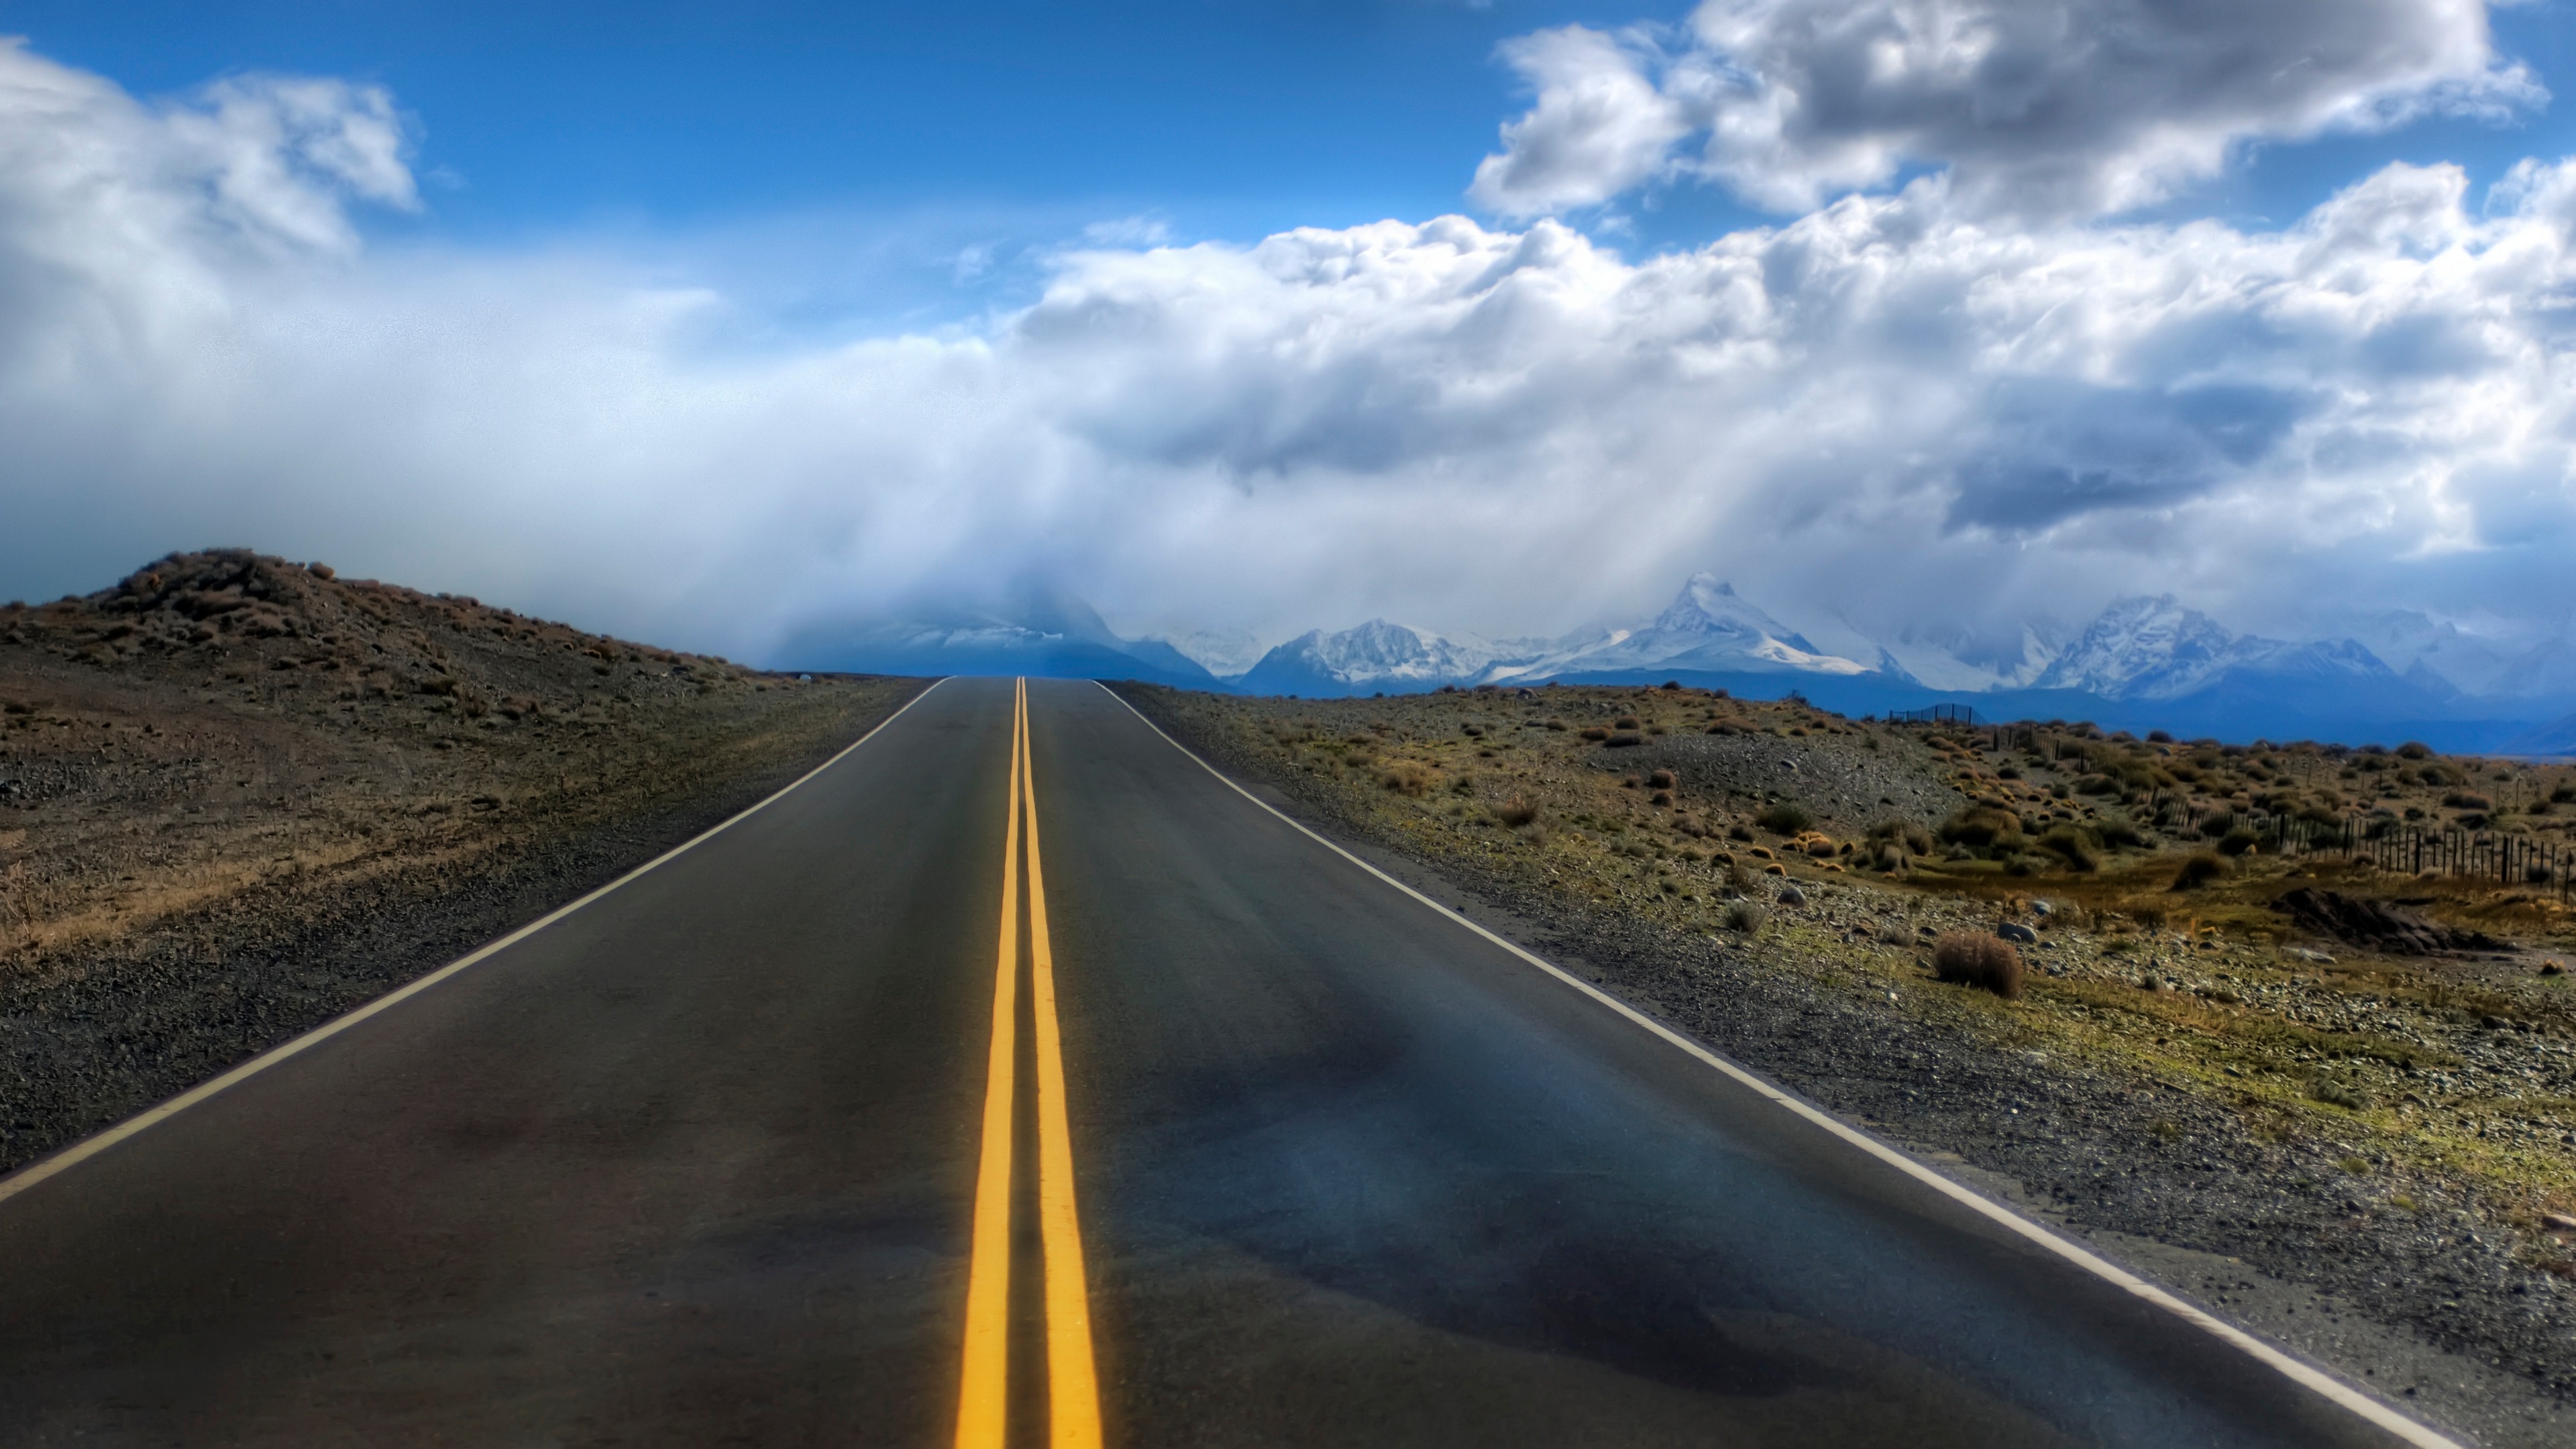 Trey Ratcliff Photography Landscape Road Mountain Chain Andes Snow Sky Clouds 3840x2160